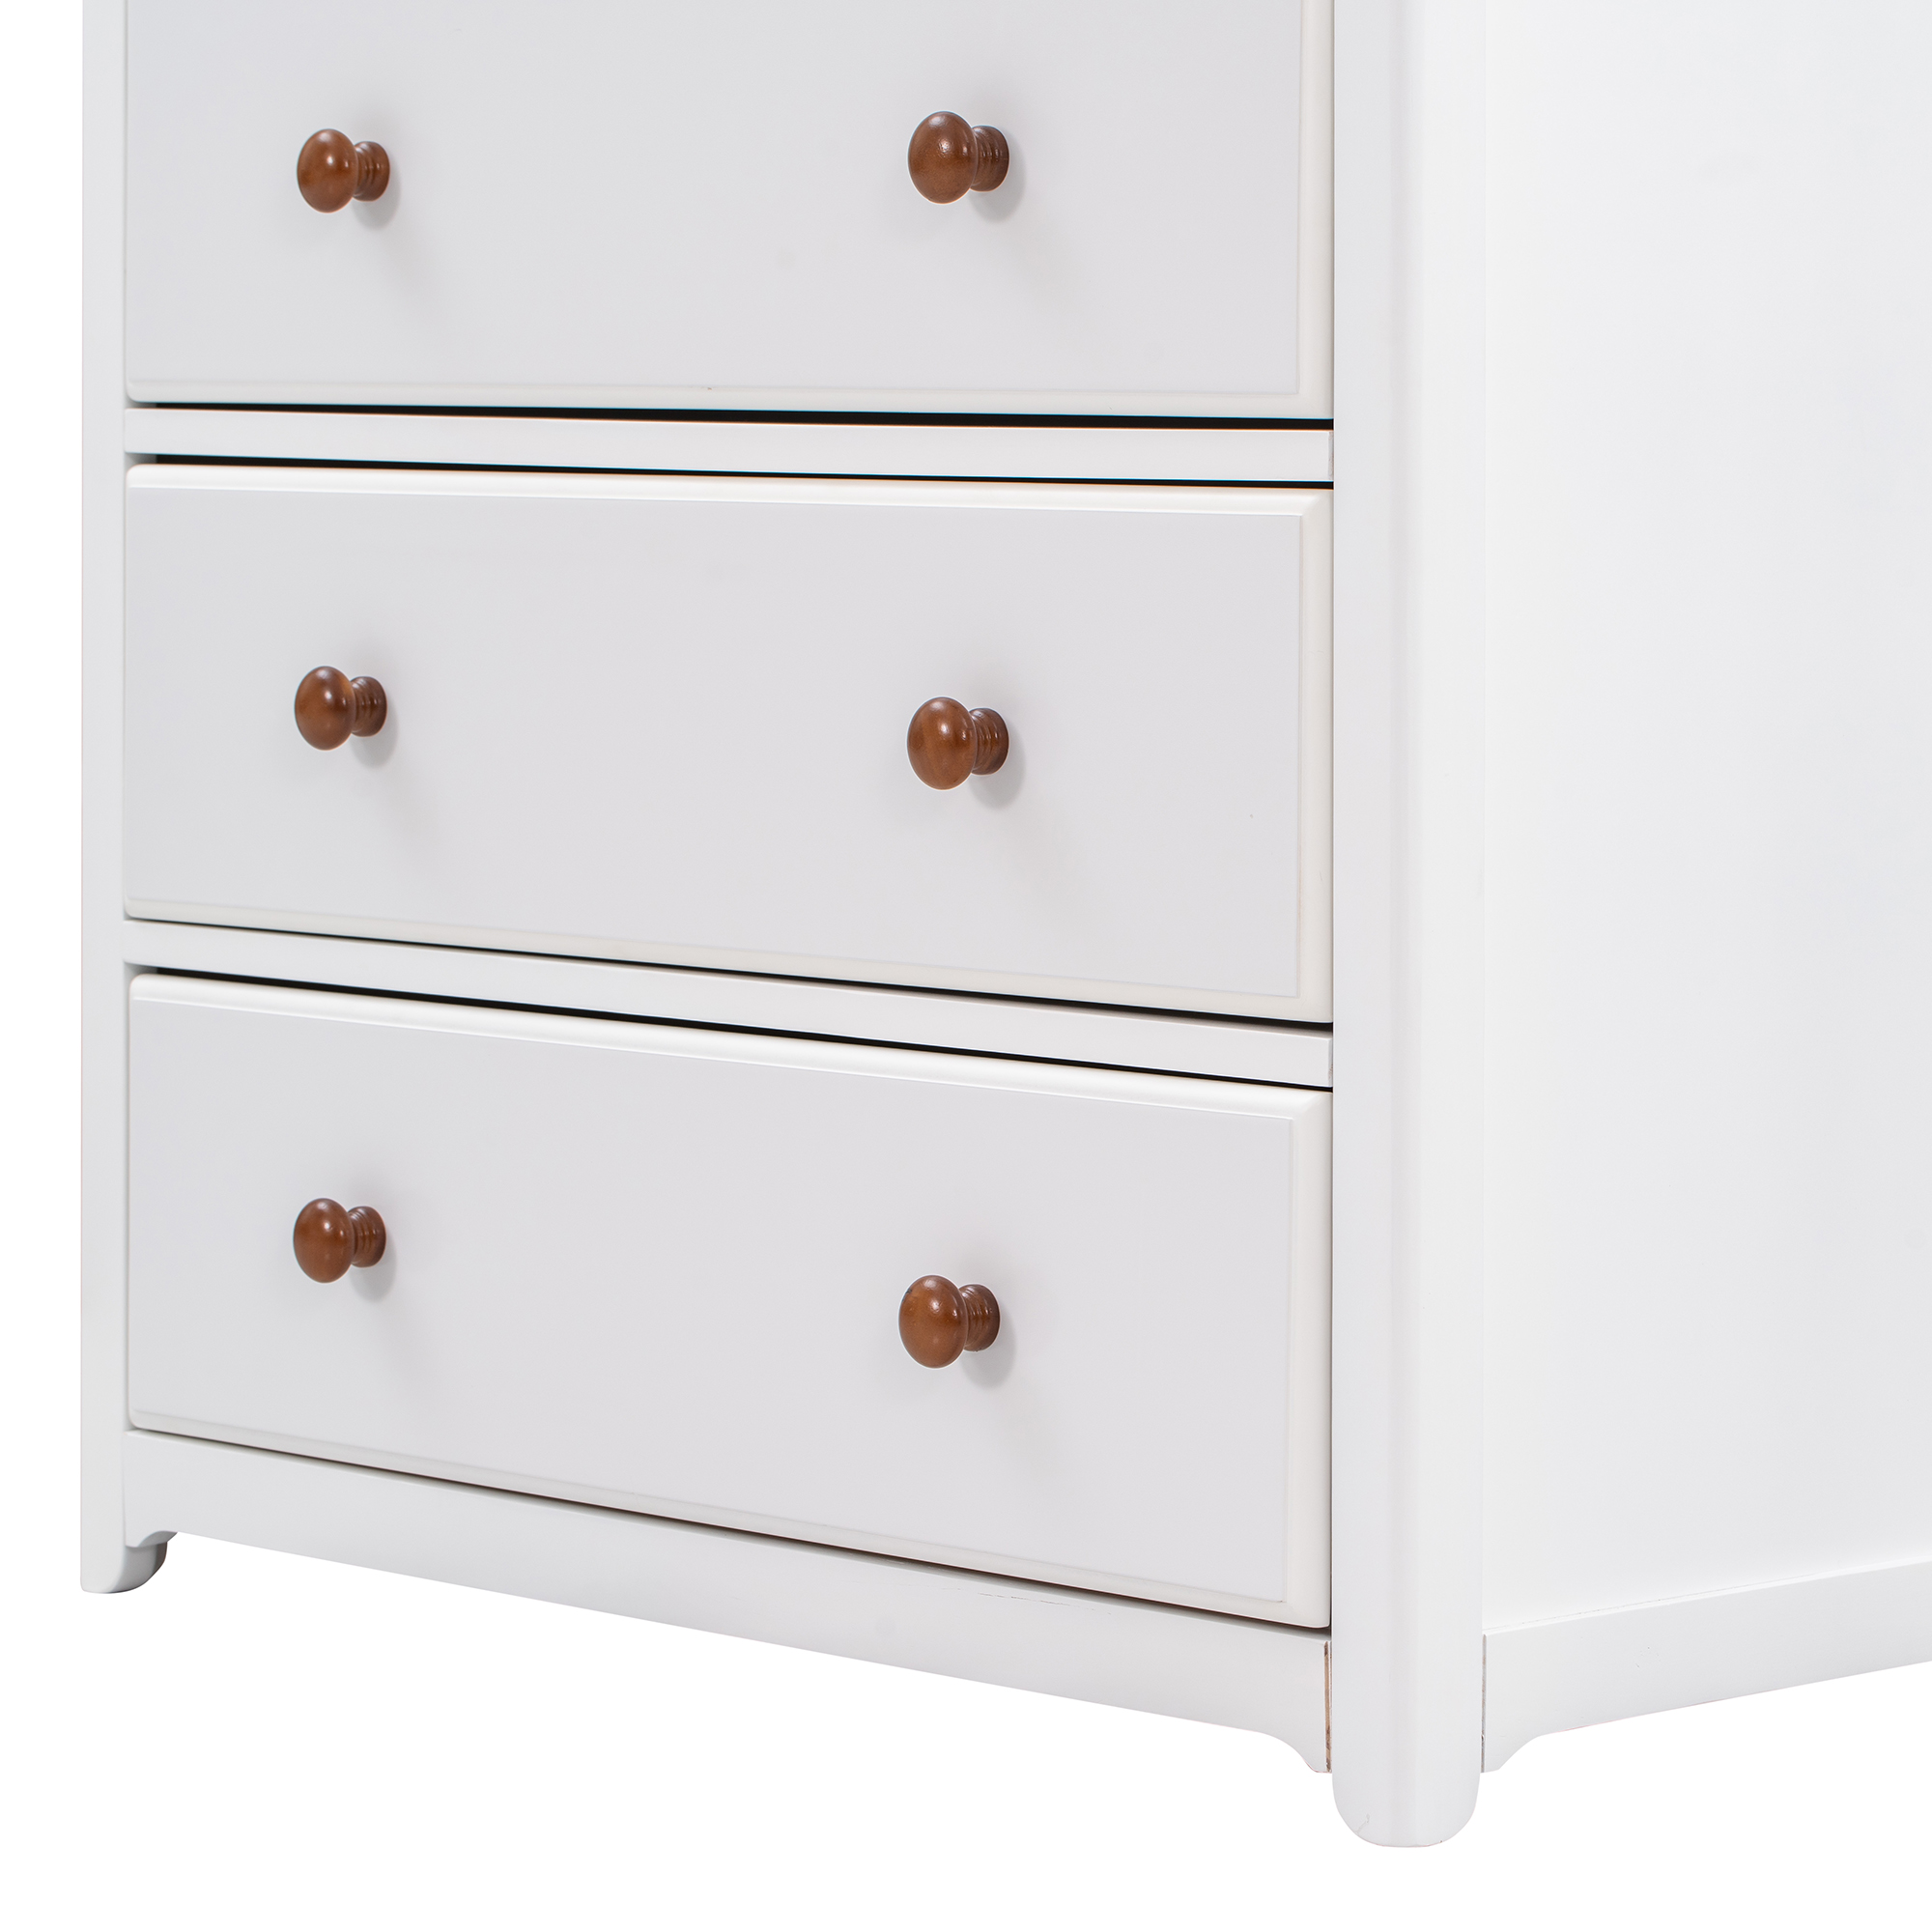 Rustic Wooden Chest with 6 Drawers - WF297097AAK